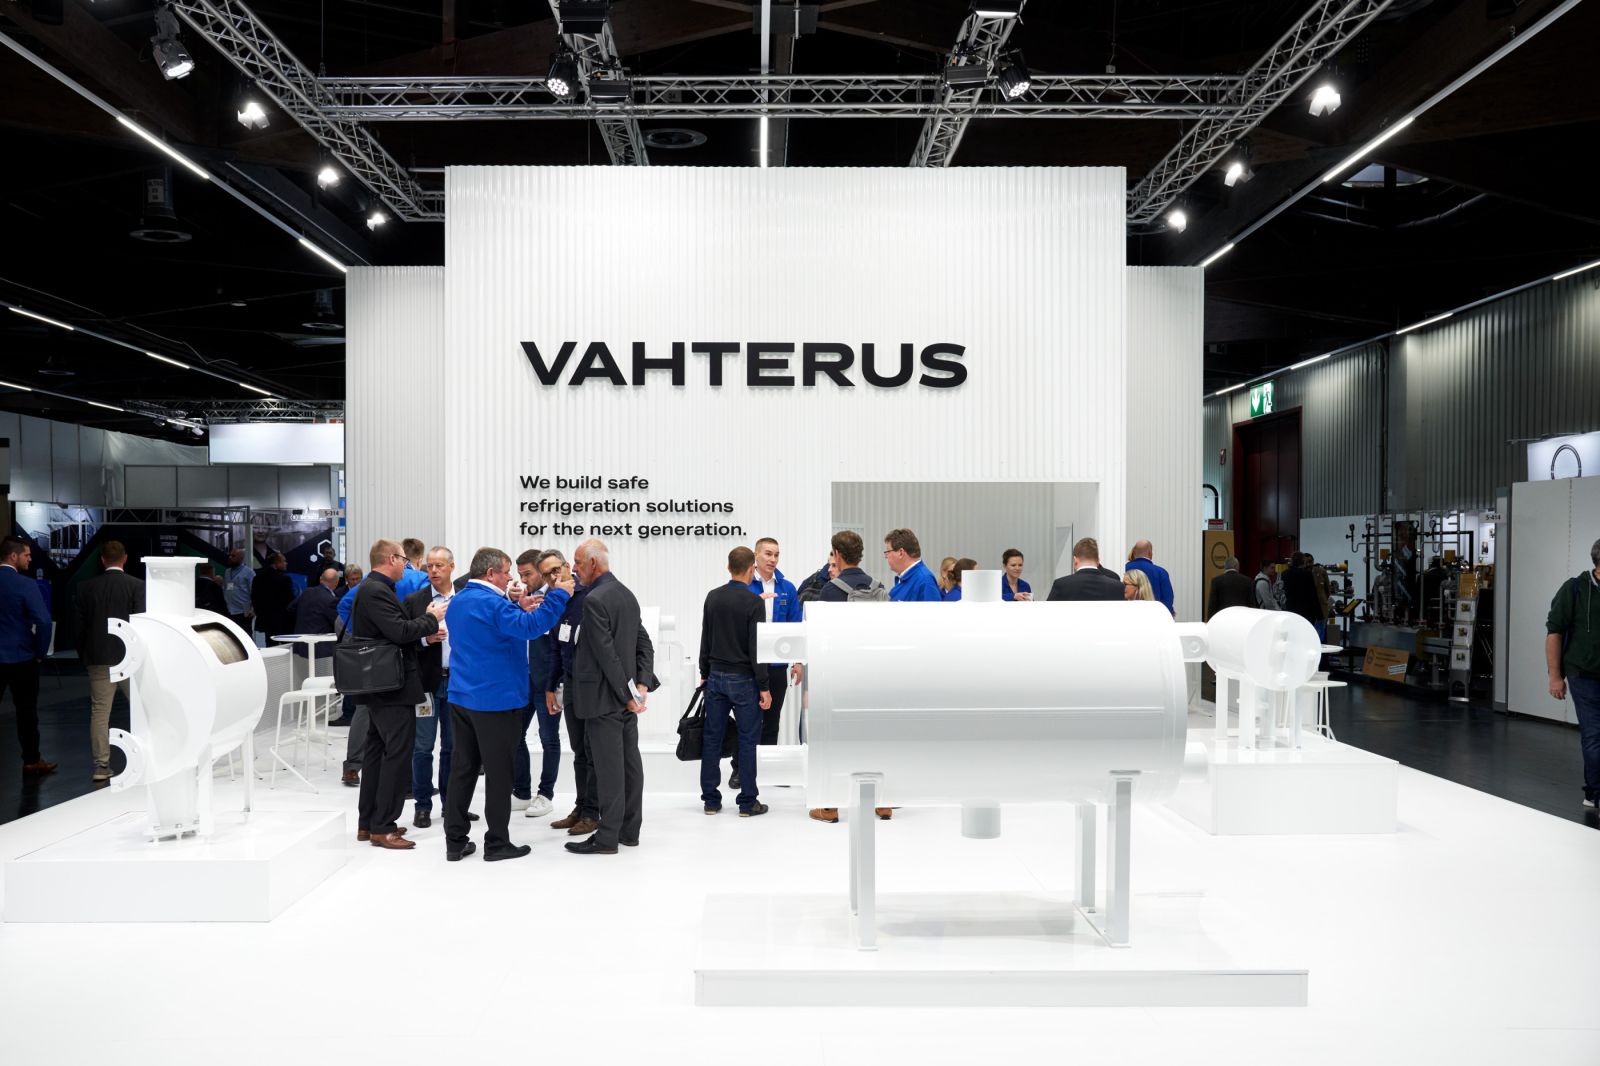 Vahterus is delighted to be exhibiting at Chillventa in Nuremberg, Germany from 11–13 October 2022. Find us in hall 5, booth 5-314.